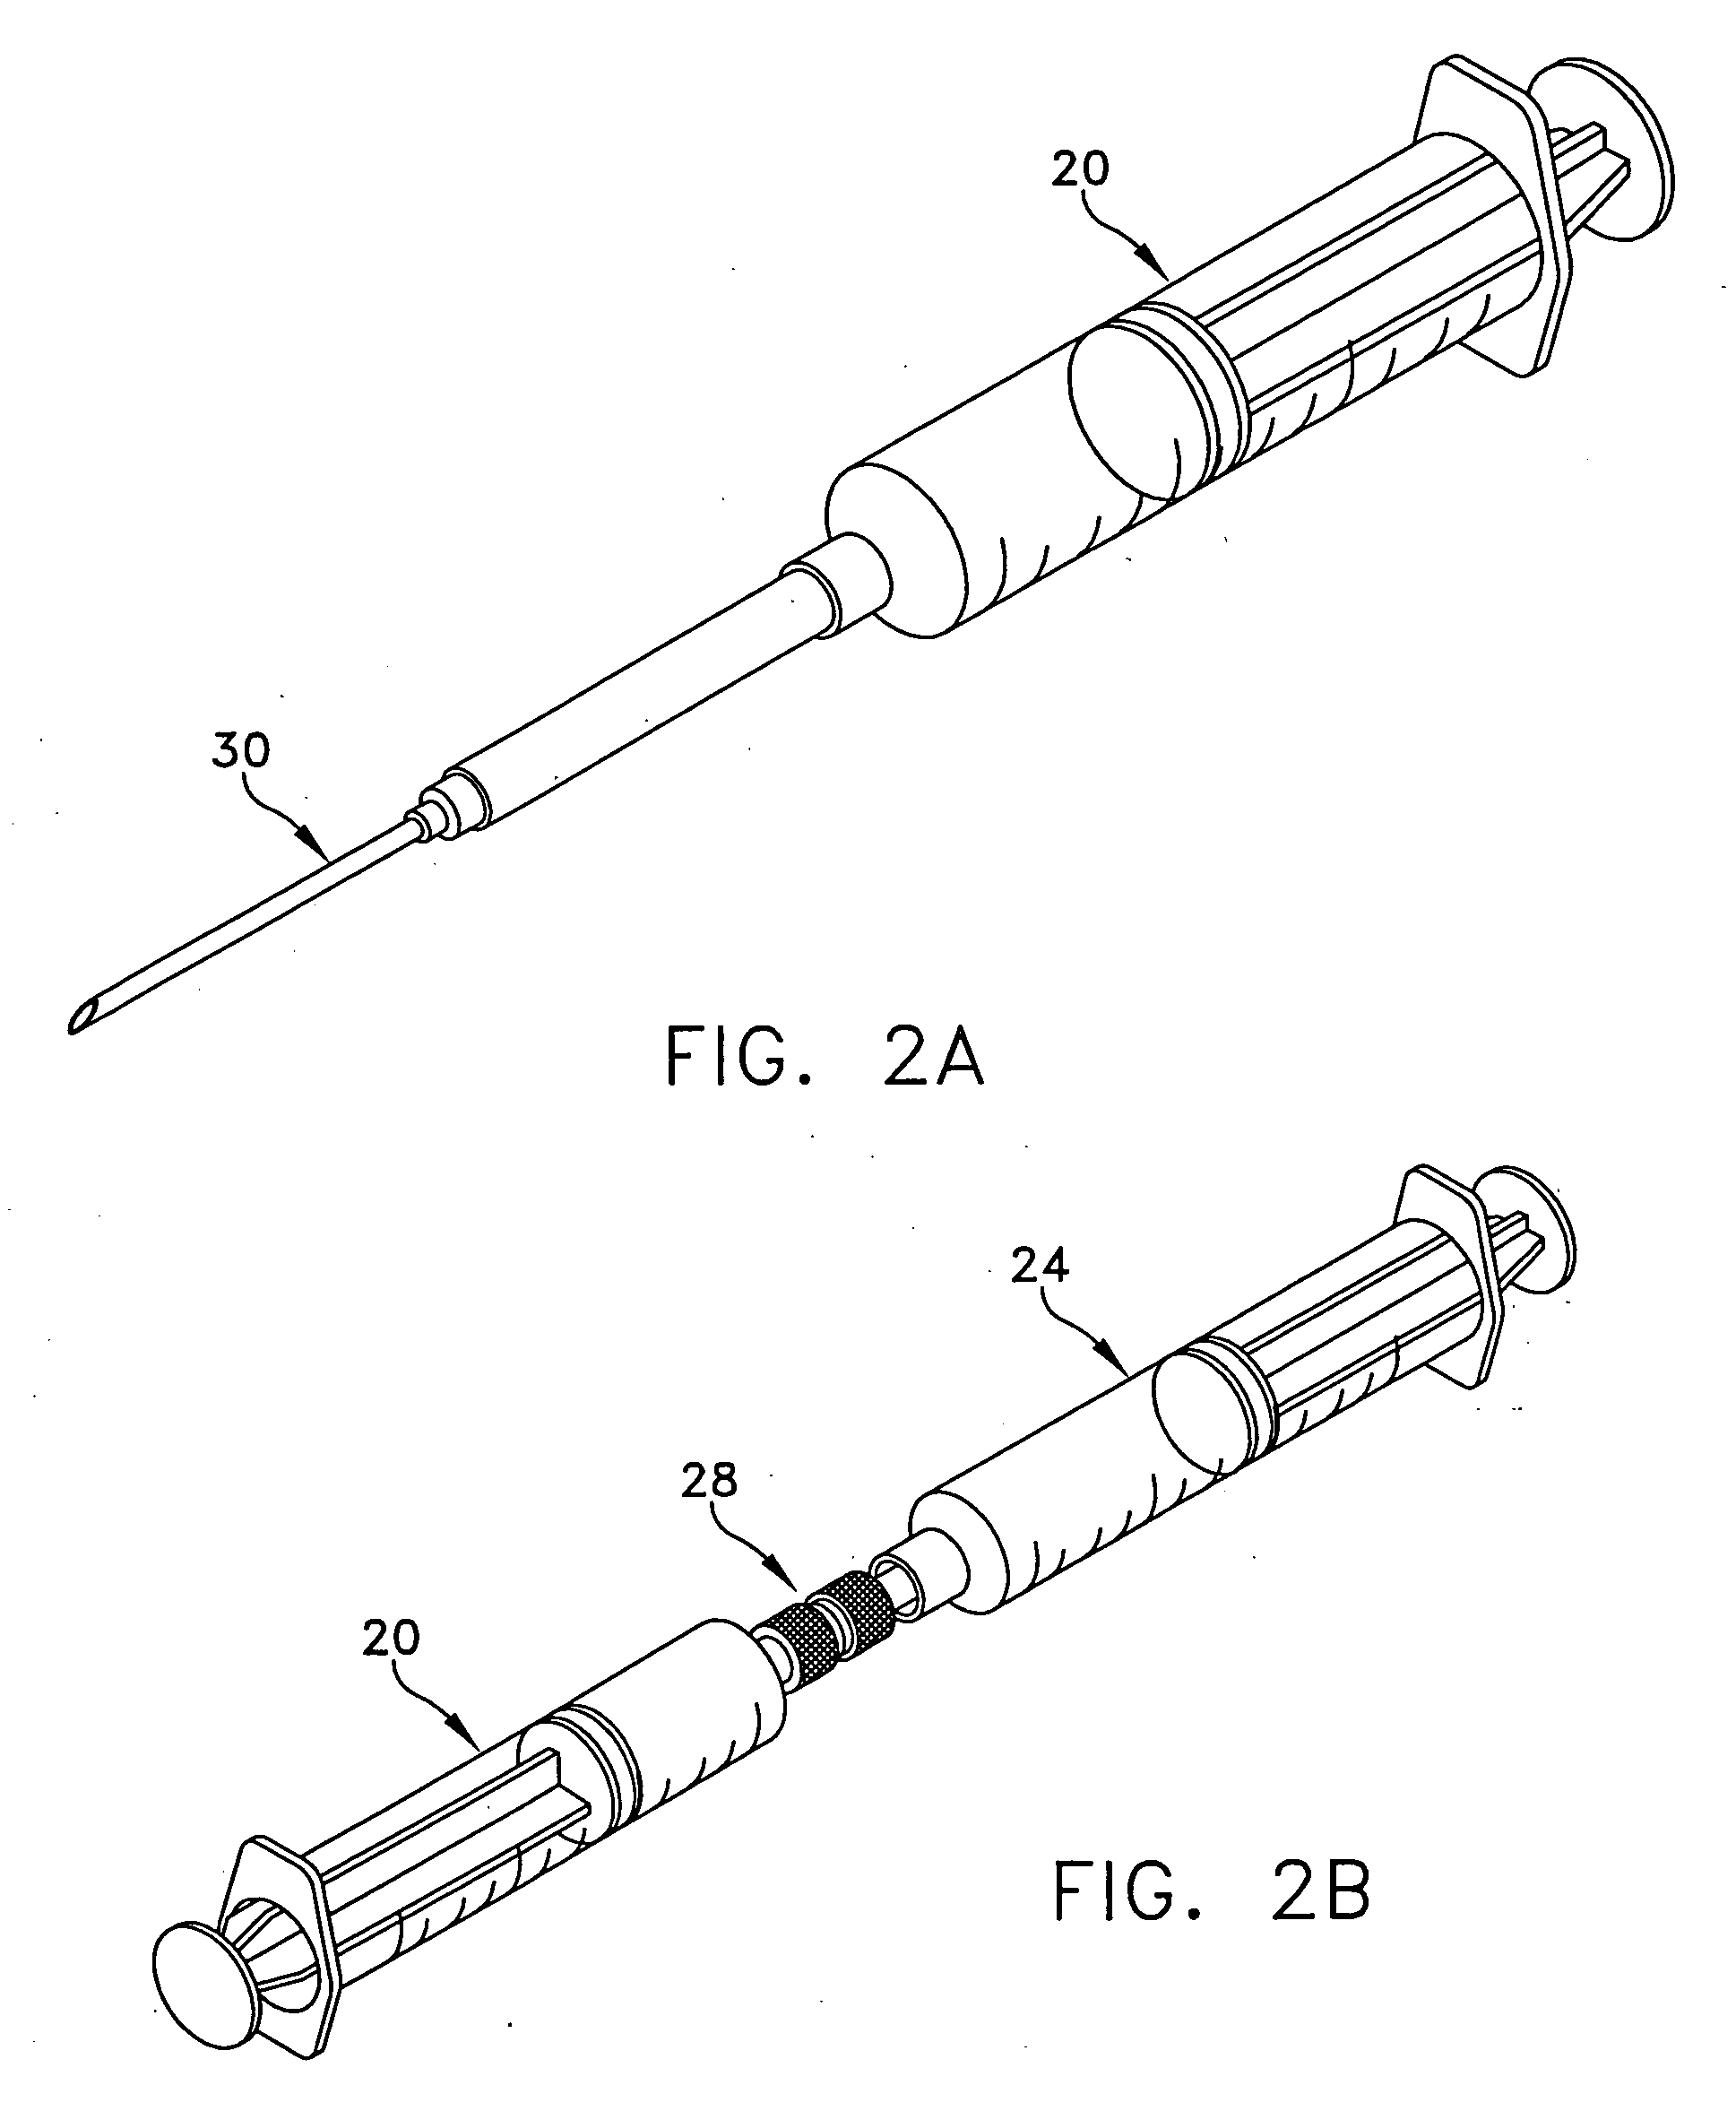 Systems and methods for augmenting tissue volume